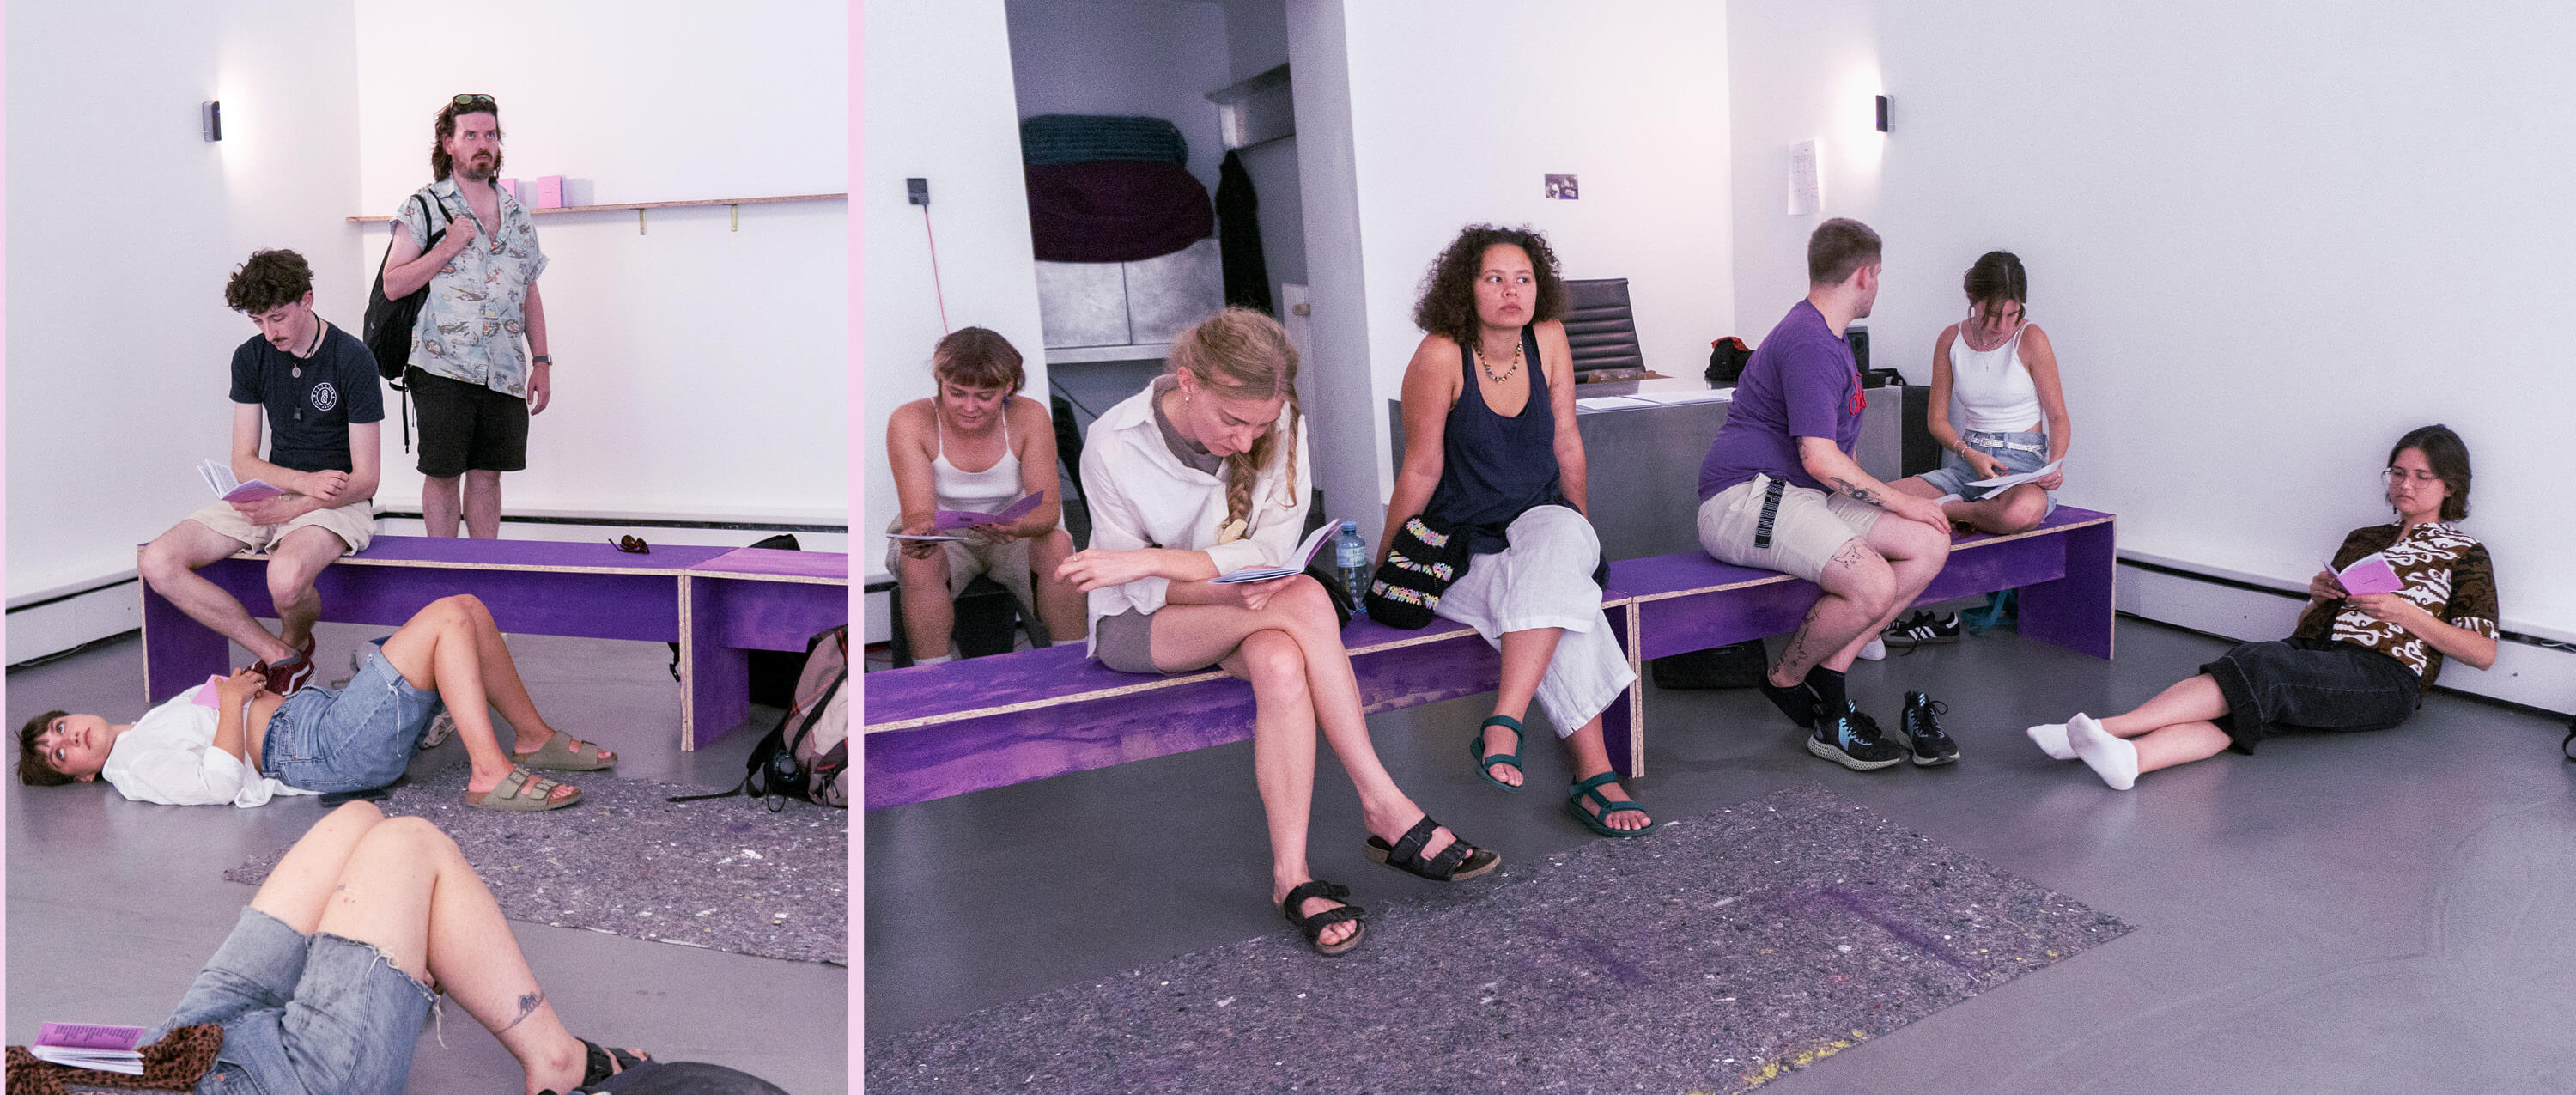 Contemporary art exhibition with speakers, purple benches and people hanging out.